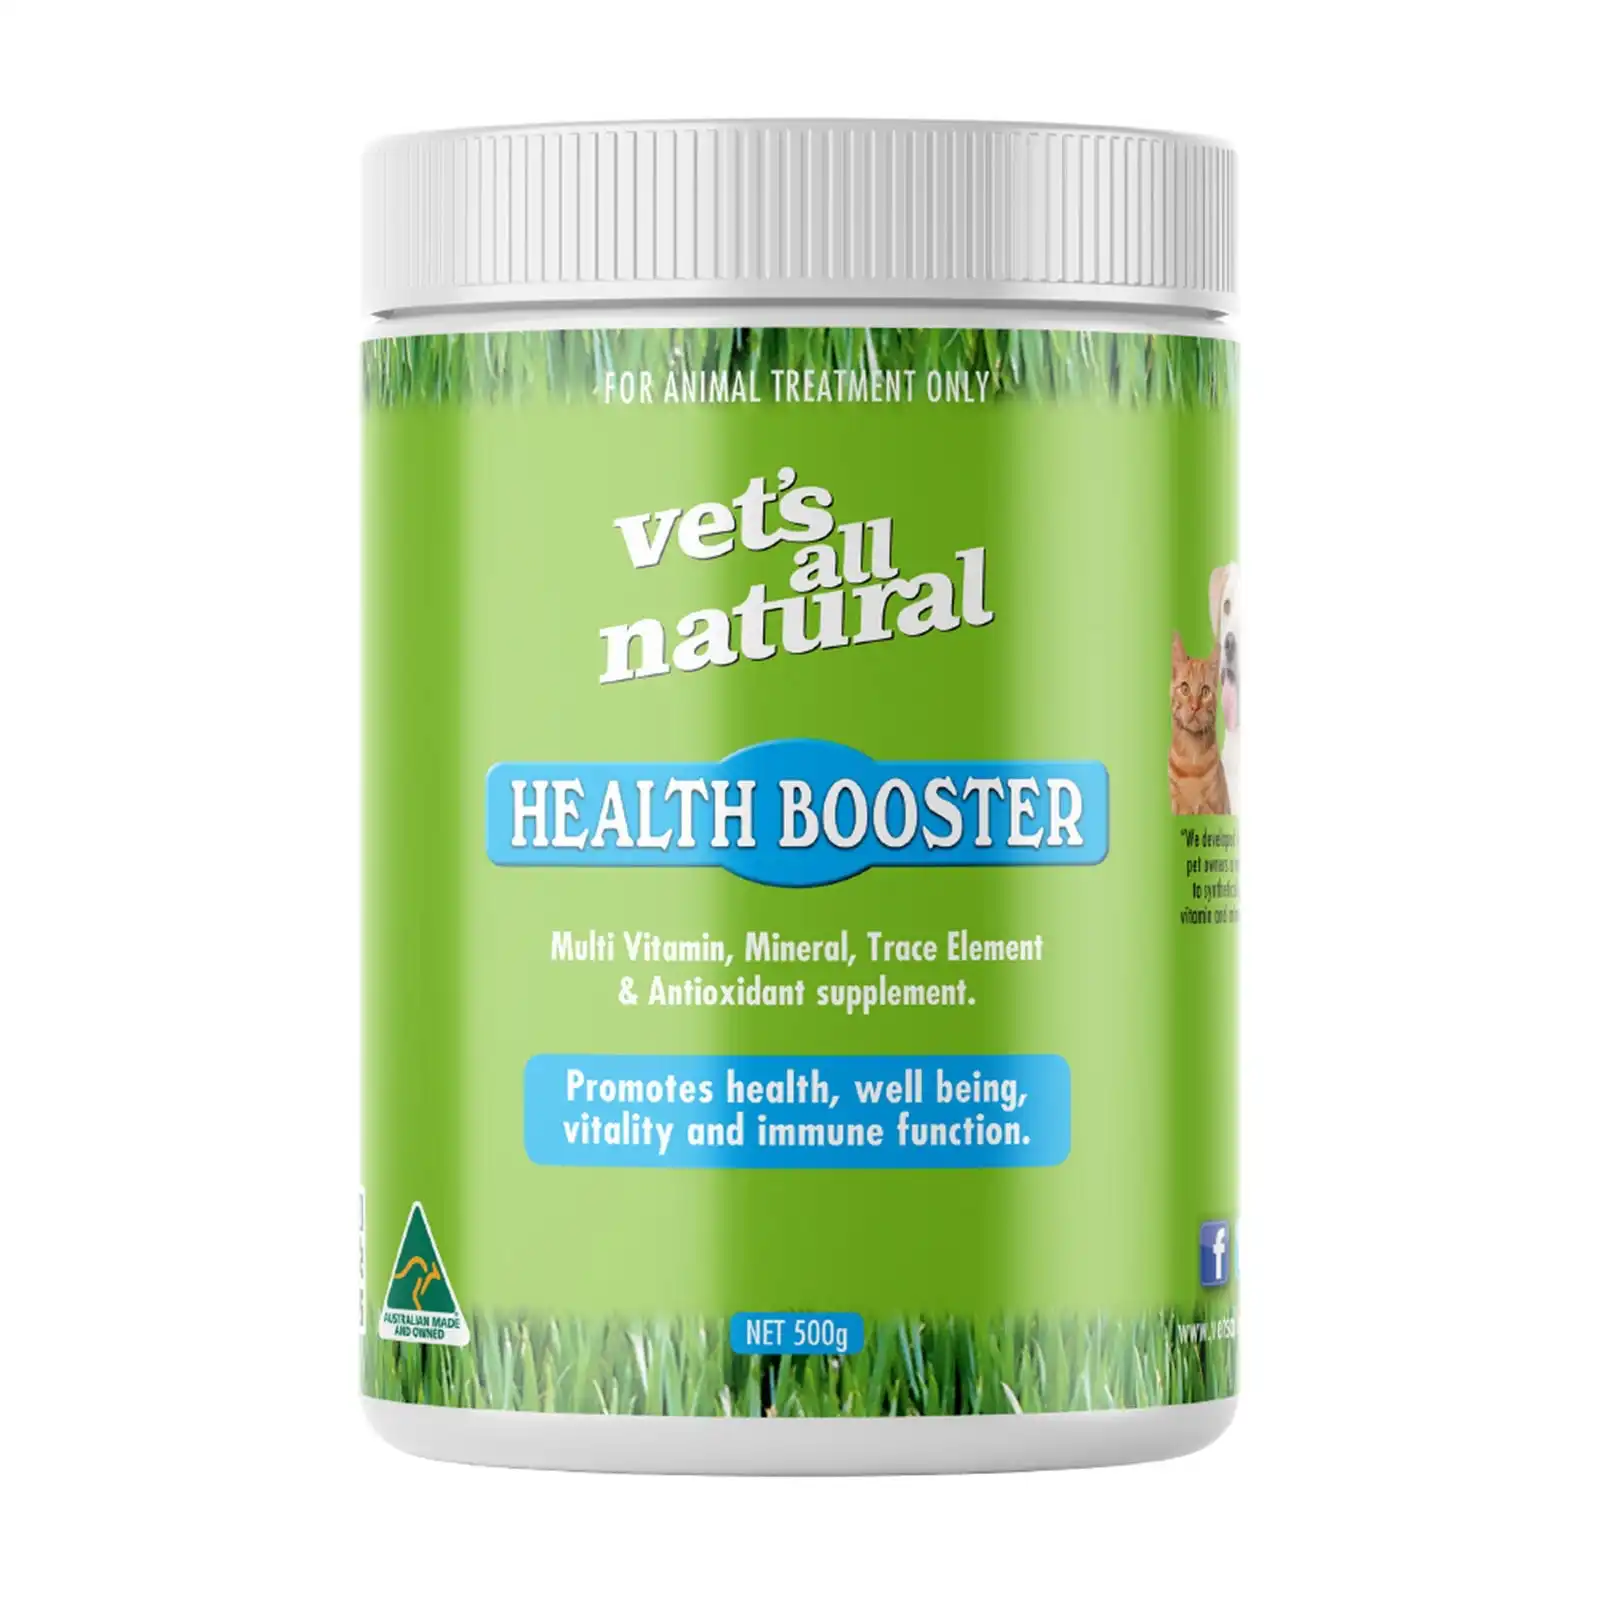 Vets All Natural Health Booster Powder Nutritional Supplement For Dogs And Cats 500g